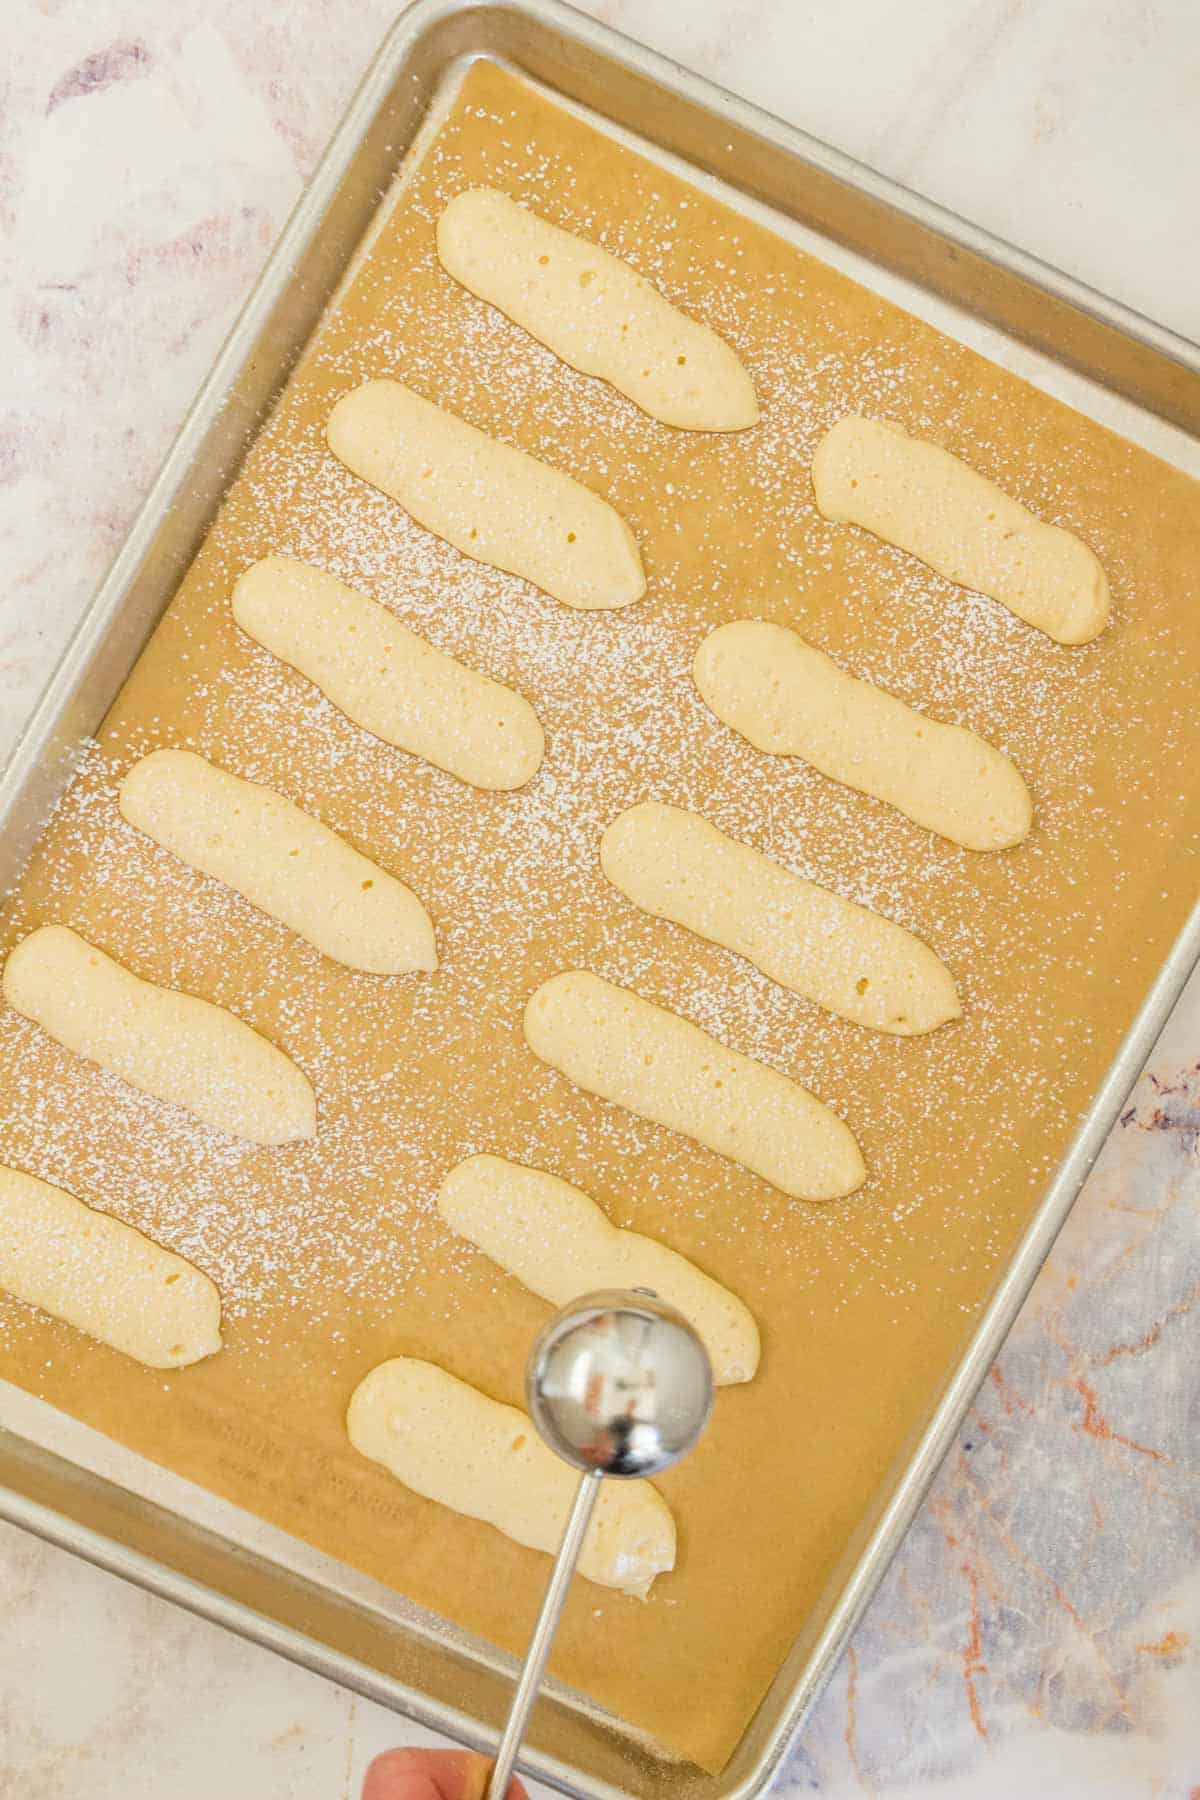 Unbaked ladyfingers are dusted with powdered sugar on a parchment lined baking sheet.